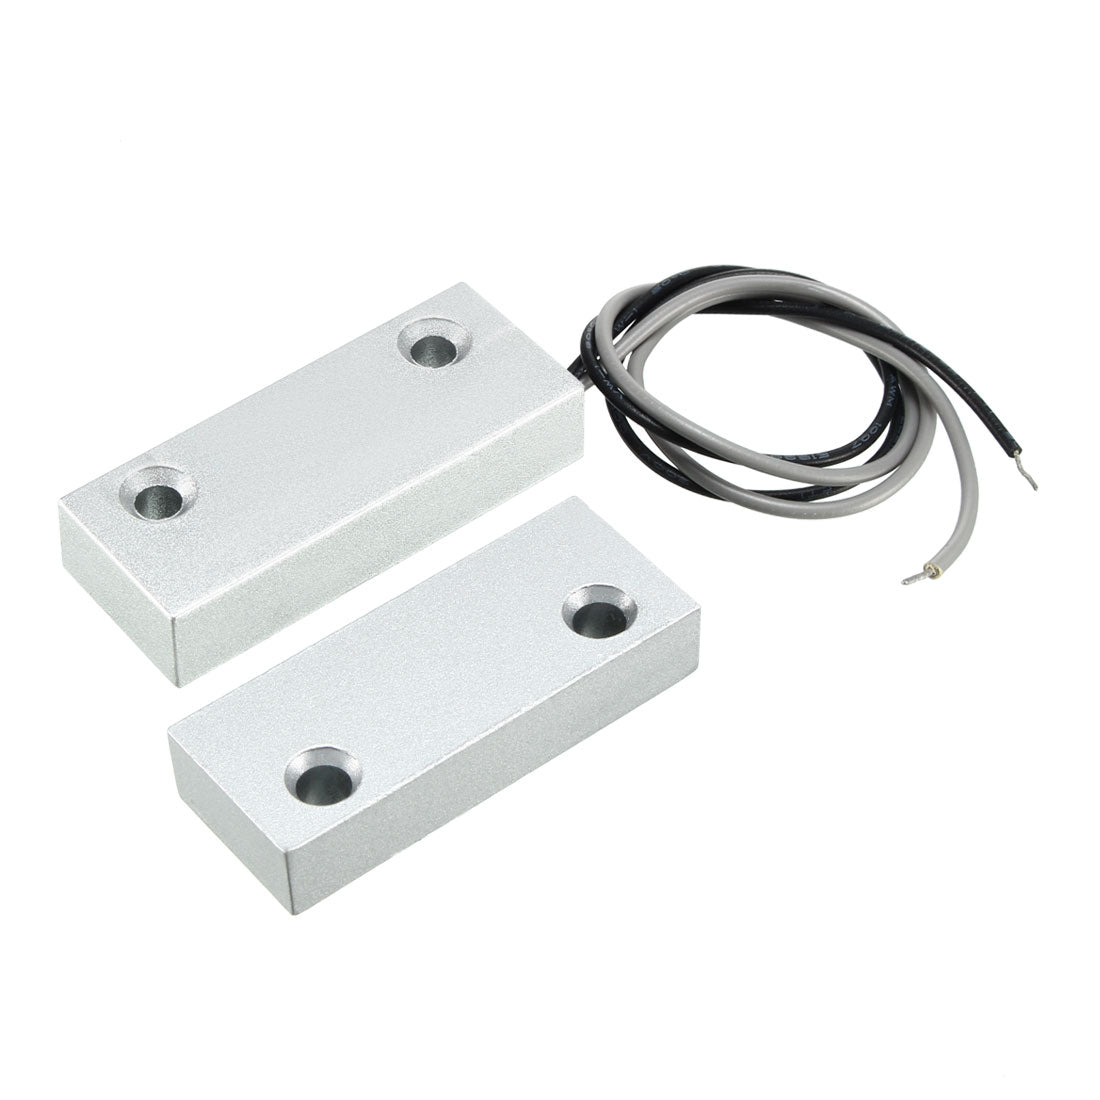 uxcell Uxcell MC-52 NO Alarm Security Rolling Gate Garage Door Contact Magnetic Reed Switch Silver Gray